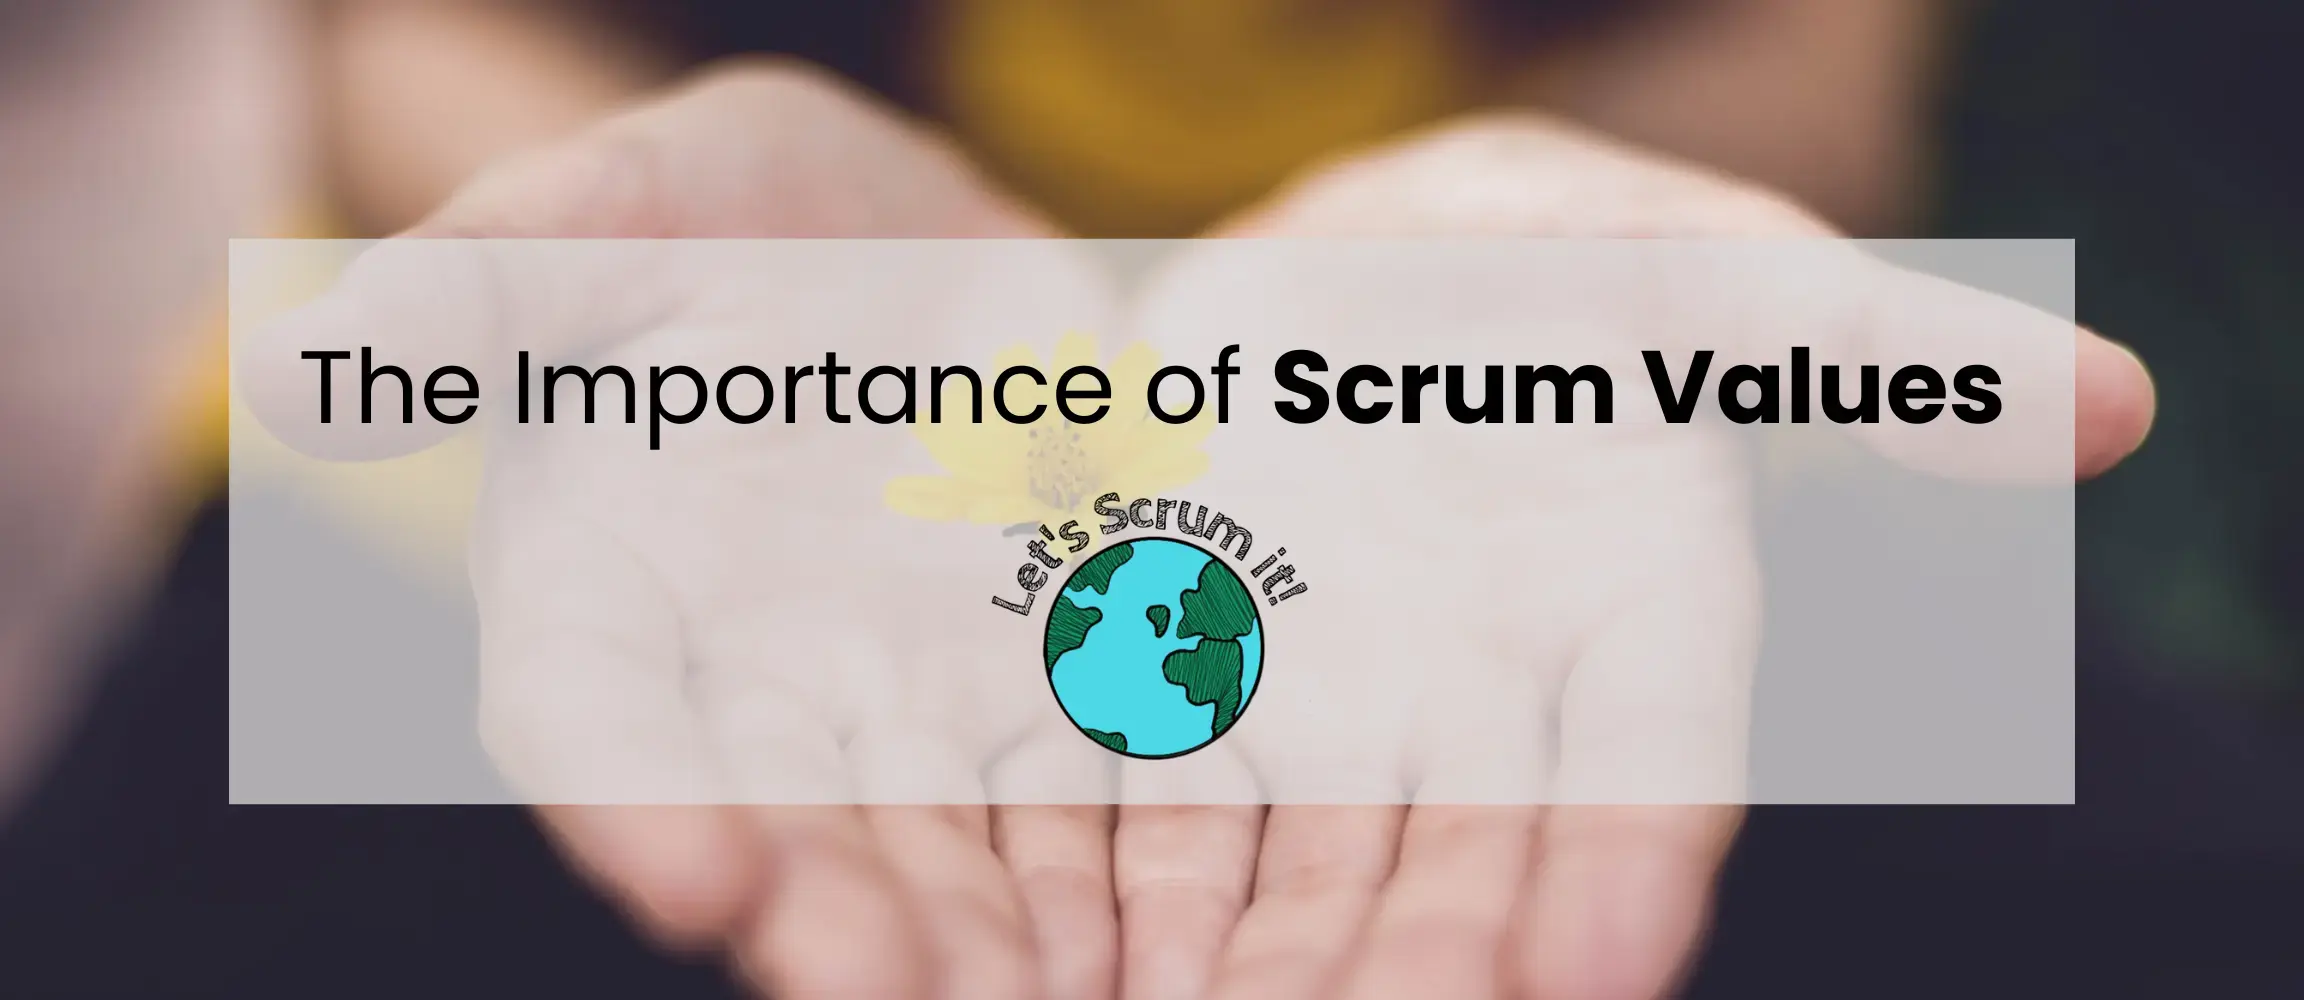 The Importance of Scrum Values